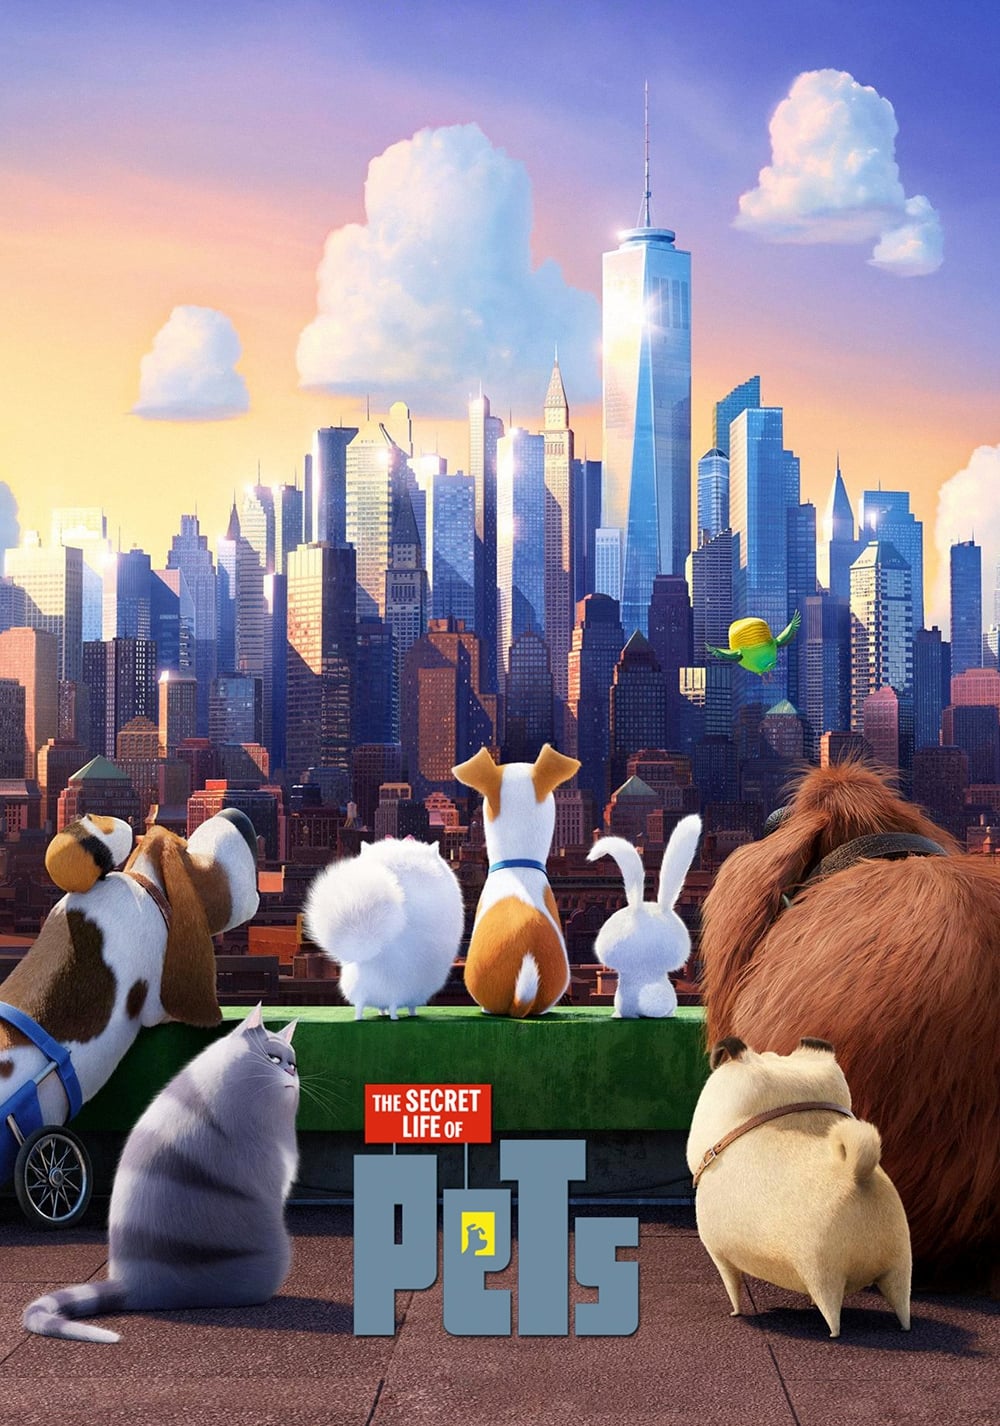 The Secret Life of Pets Movie poster